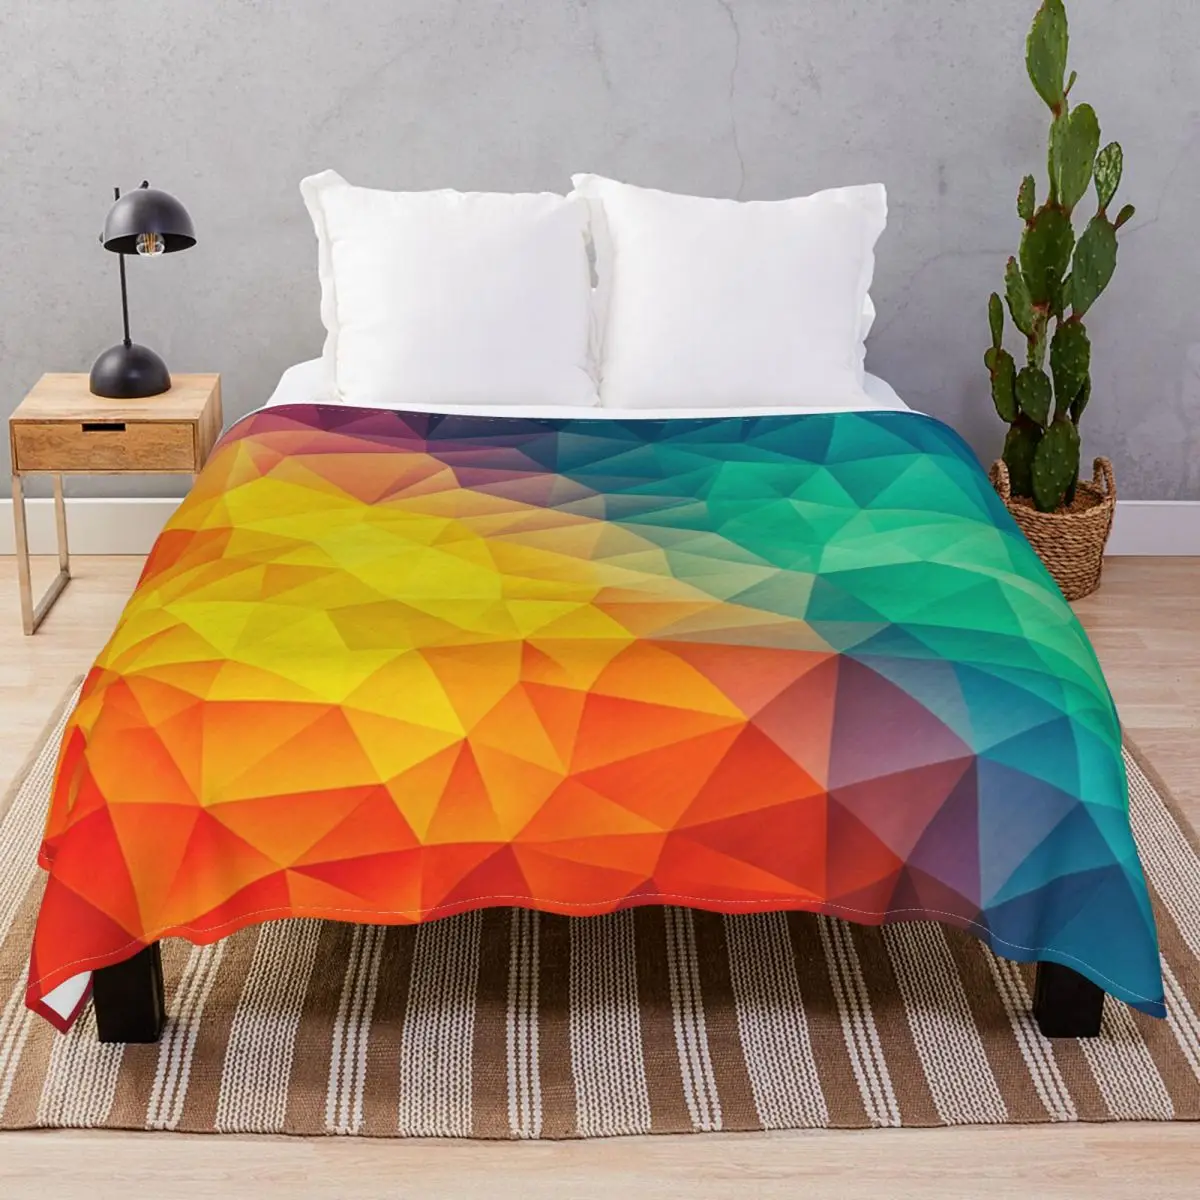 Abstract Multi Color Cubizm Painting Blanket Flannel Printed Soft Throw Blankets for Bed Home Couch Camp Cinema